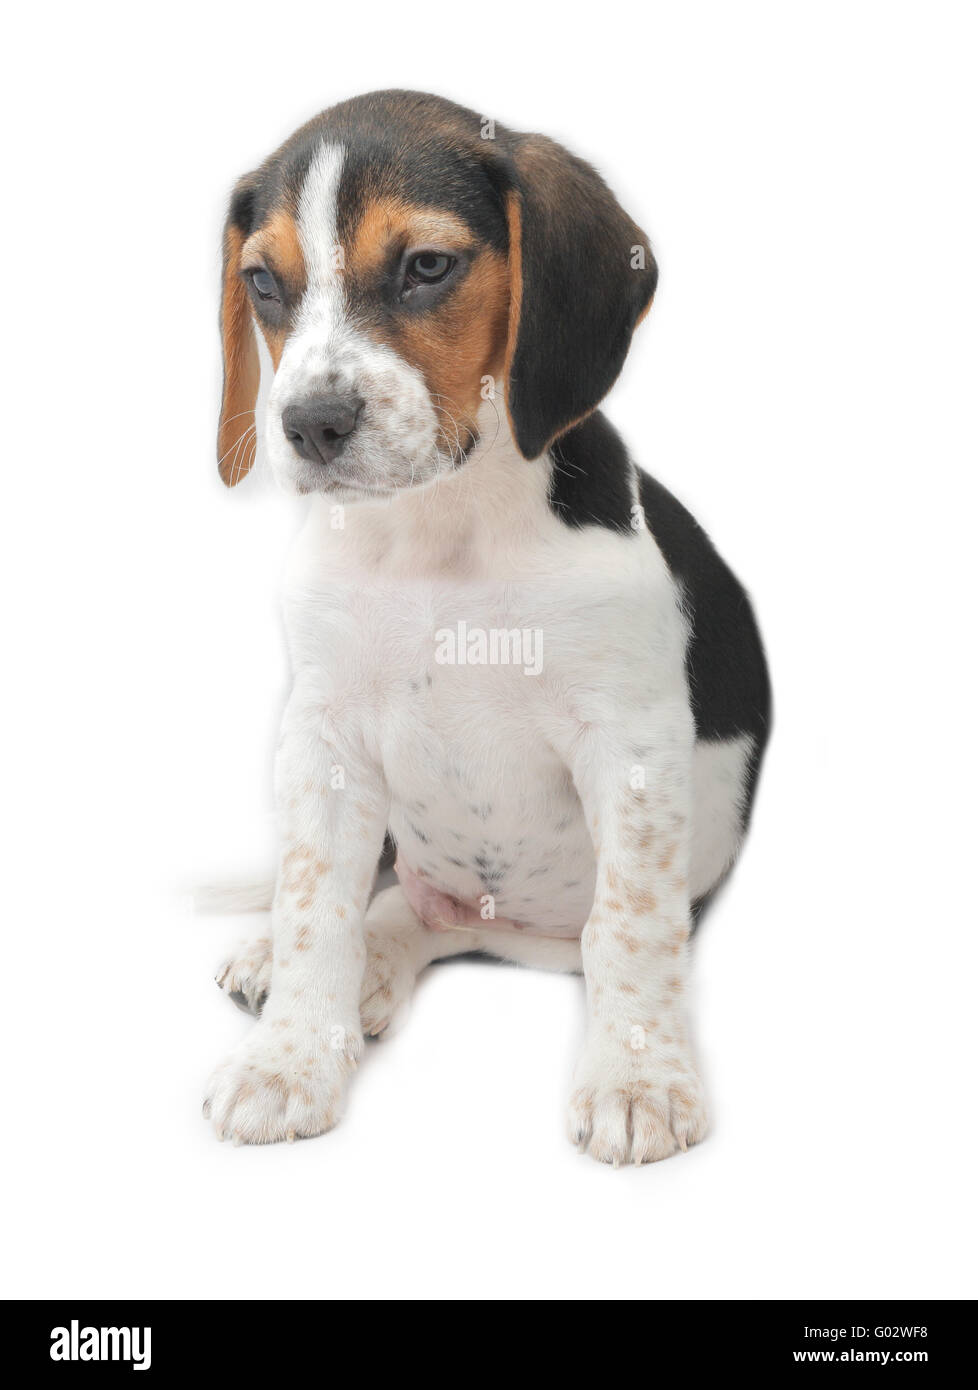 Cute tricolor beagle puppy sitting isolated over white background Stock Photo